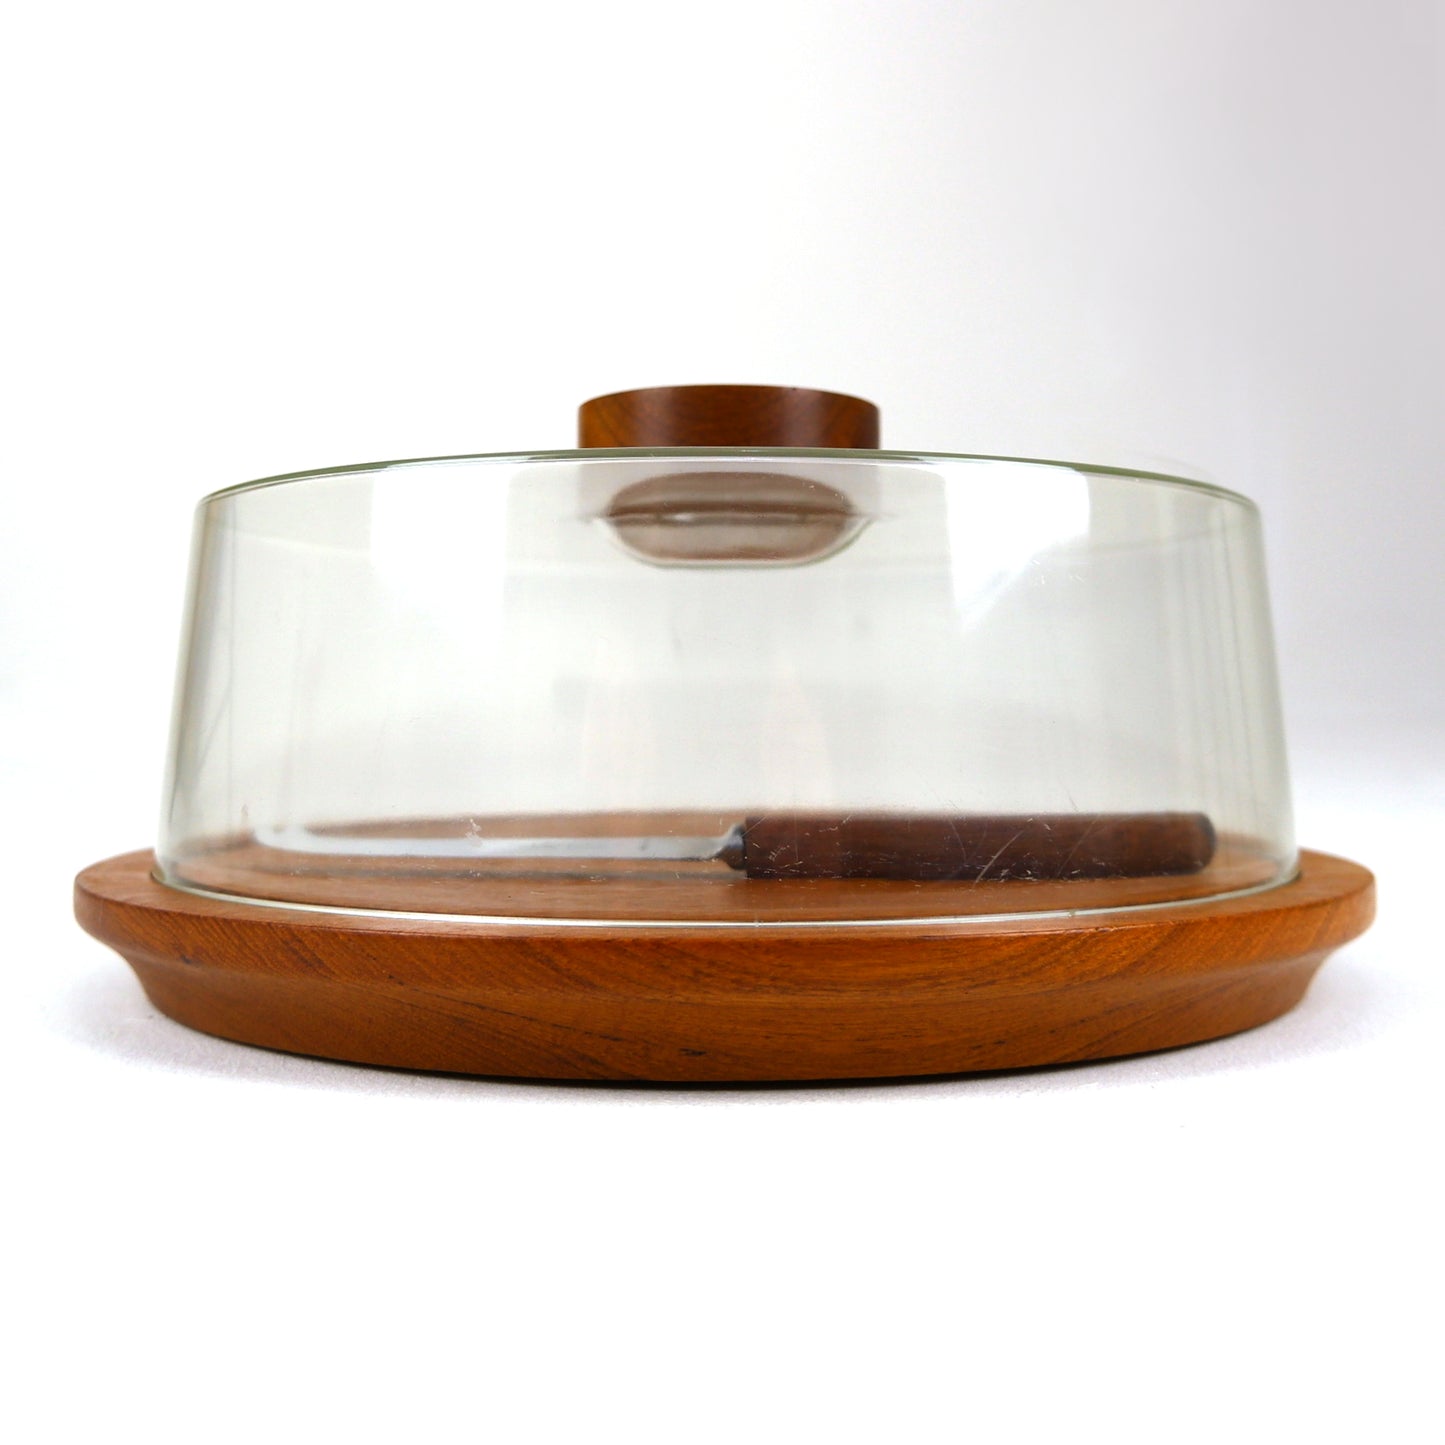 Modernist Cole & Mason Cheese Dome and Cheese Knife in Teak and Perspex - Mid Century Modern